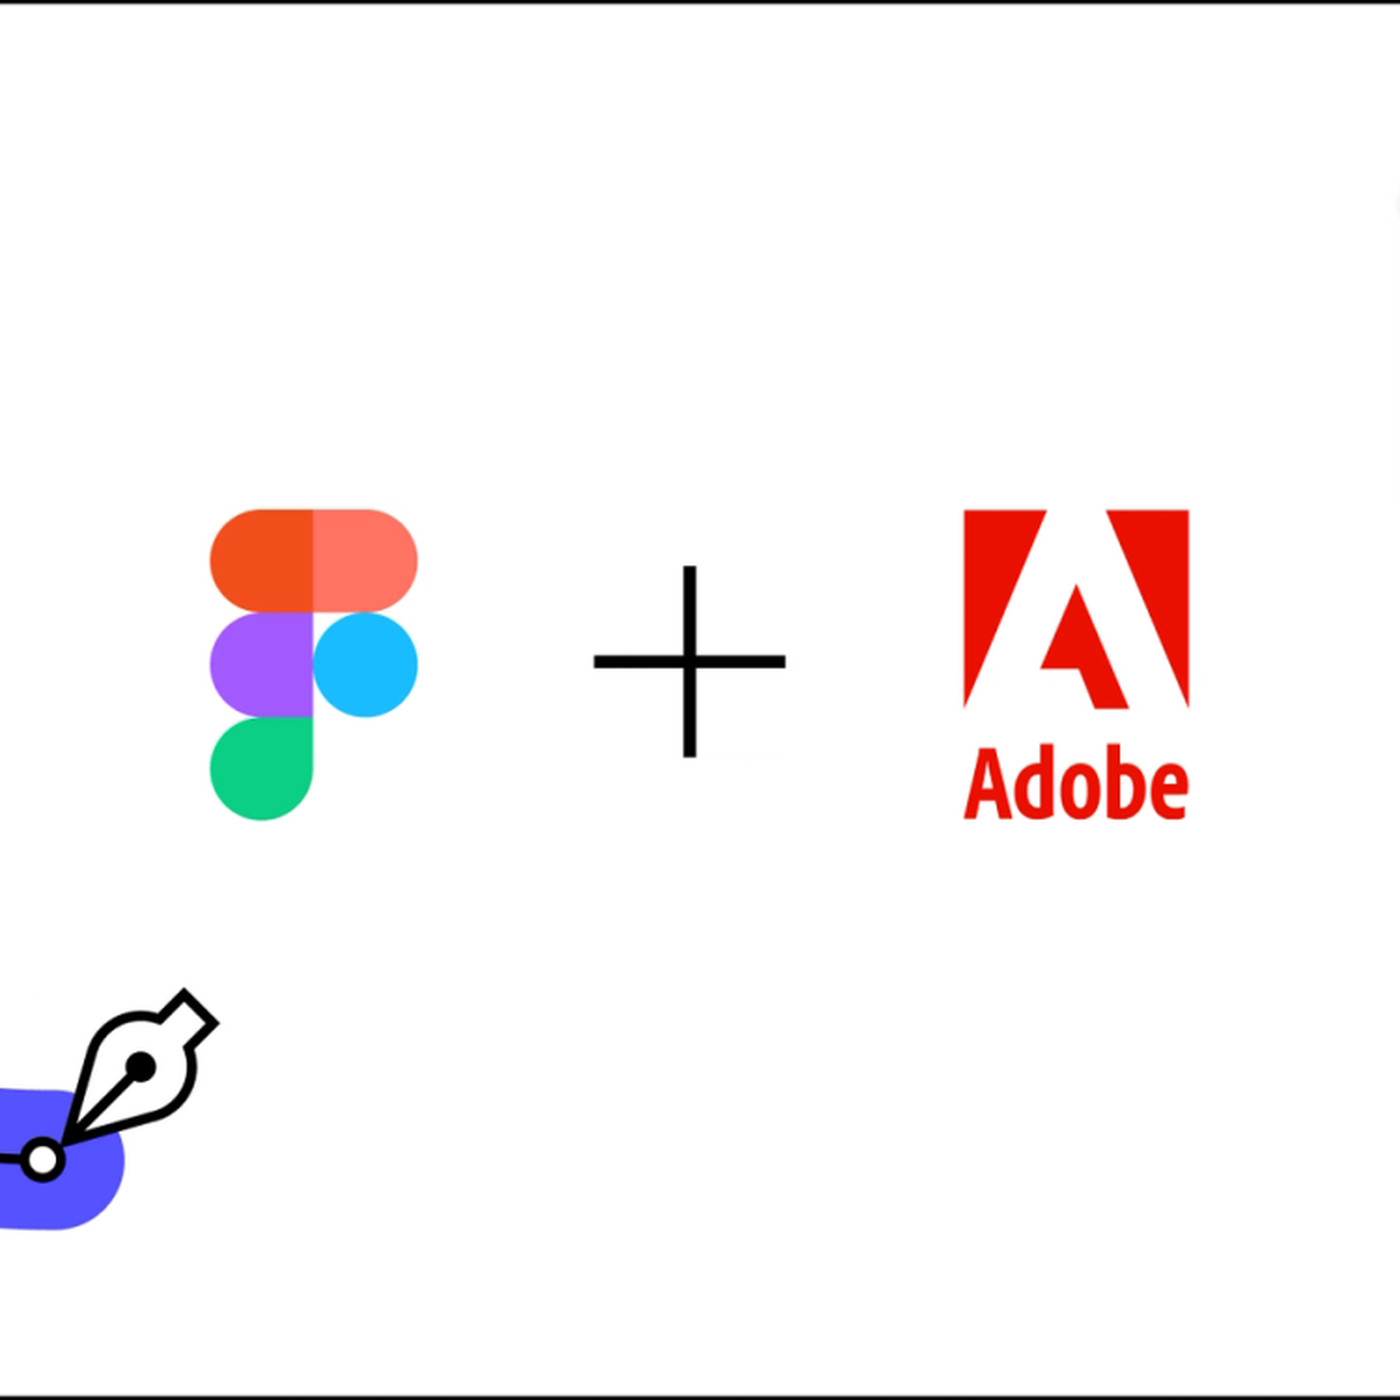 Adobe Buys Figma For $20 Billion: Biggest Deal in the Visual Arts Industry